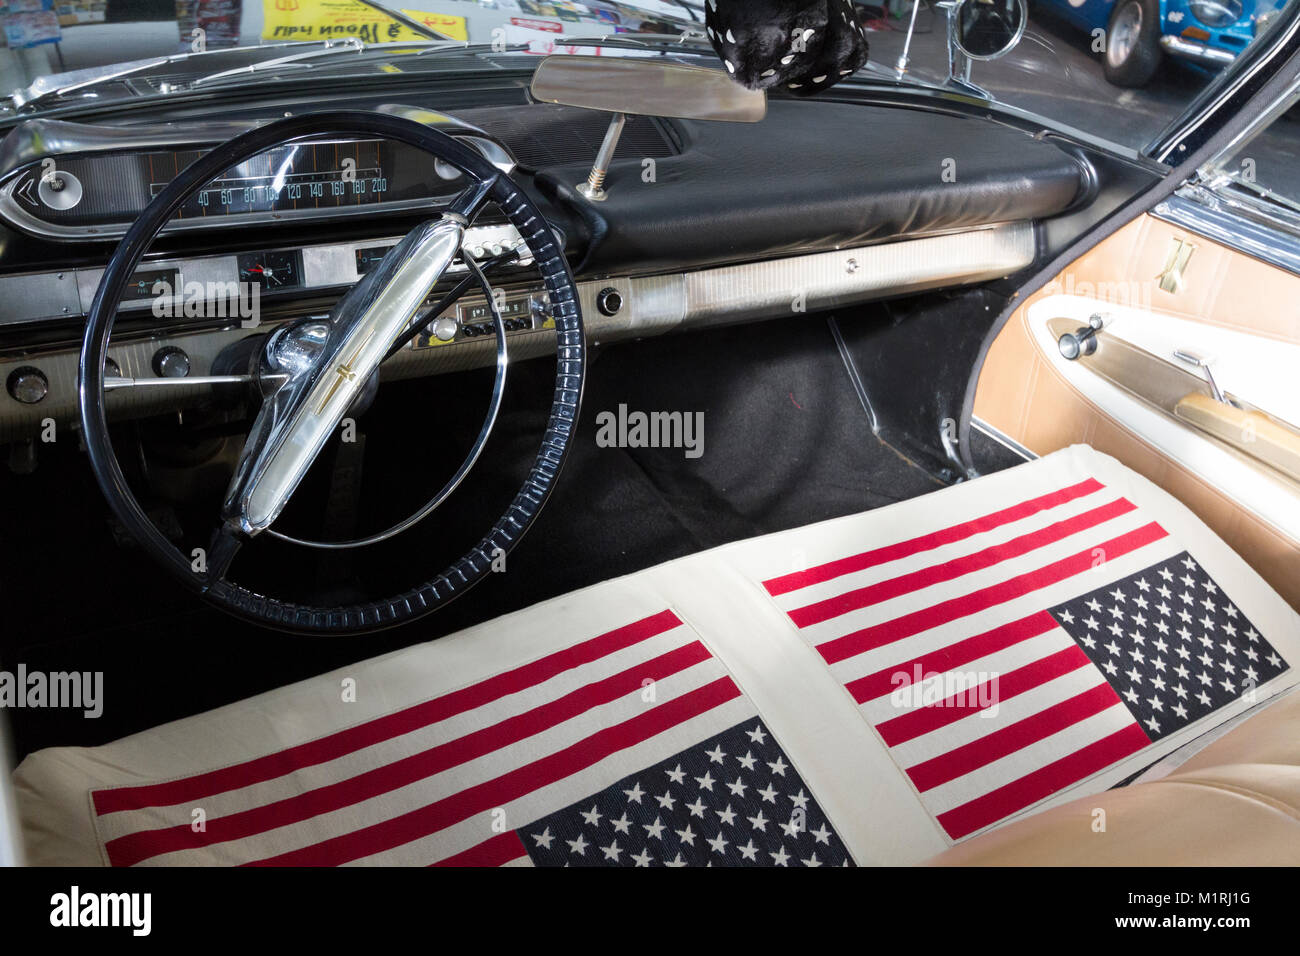 Torino, Italy. 1st Feb, 2018. Interior view and dashboard of a 1960 Plymouth Fury on exhibit at historical car show. Credit: Marco Destefanis/Alamy Live News Stock Photo